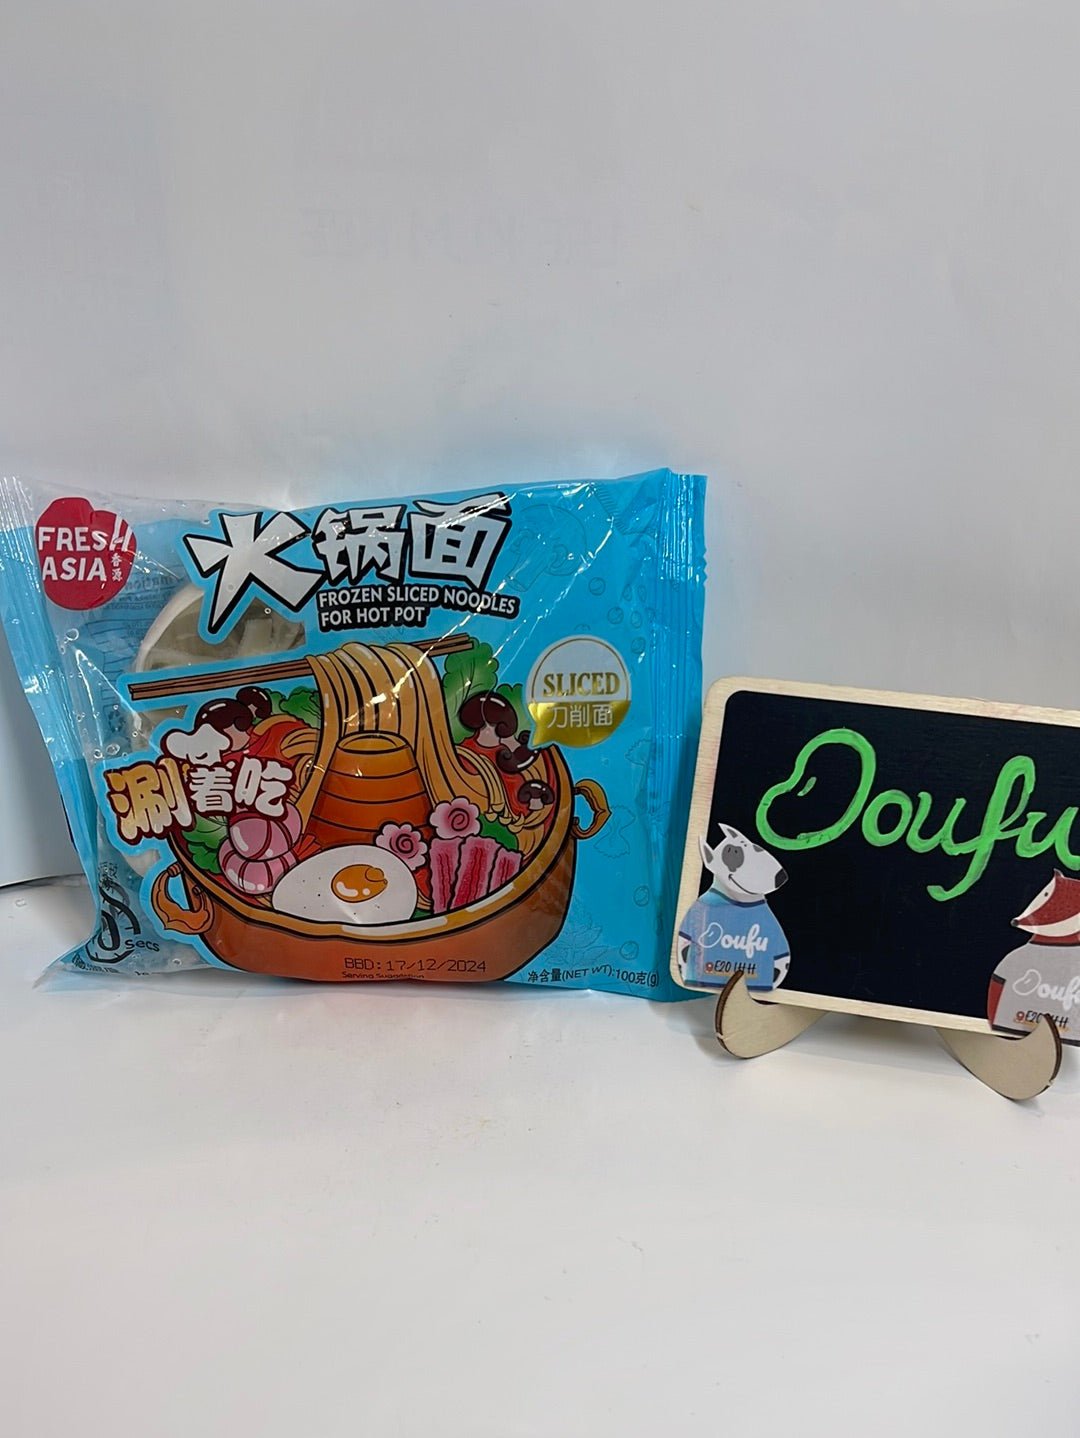 Freshasia frozen sliced noodles 冷冻火锅刀削面100g